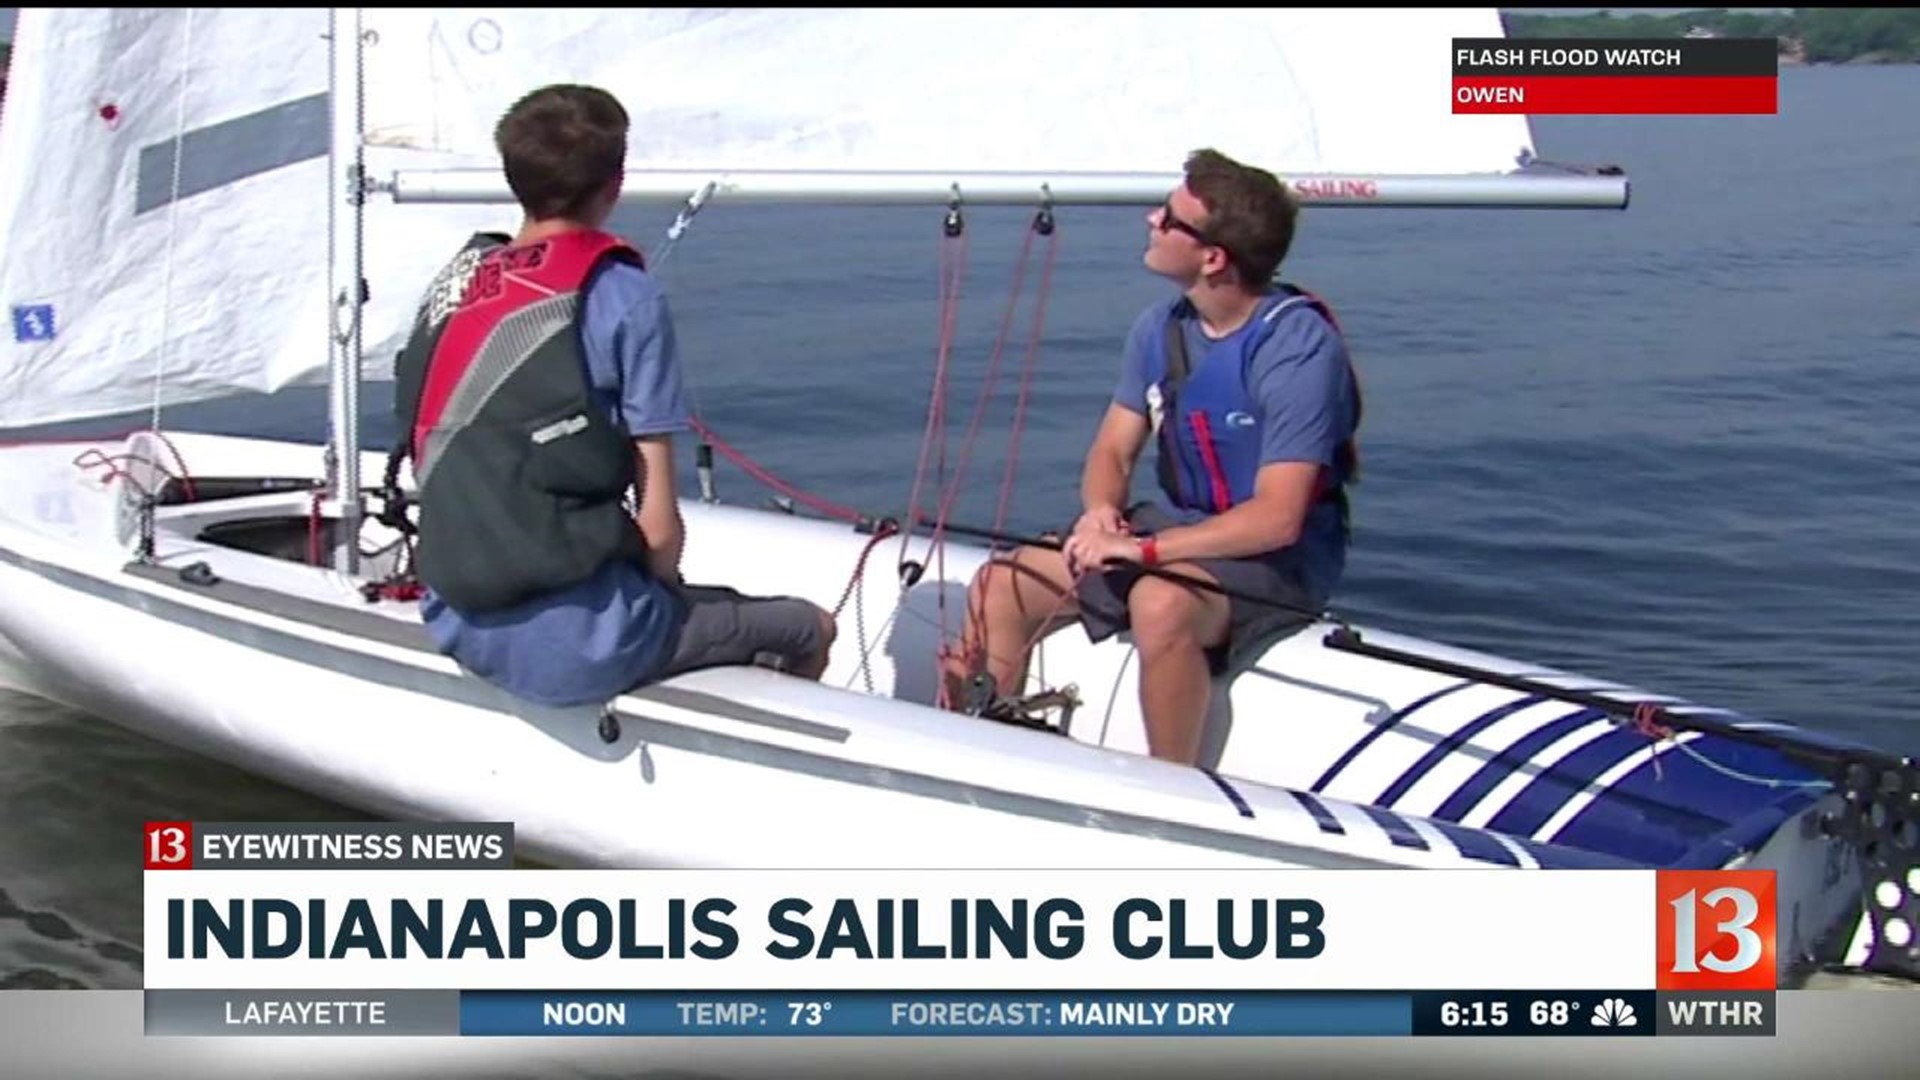 Making the most of summer - Indianapolis Sailing Club